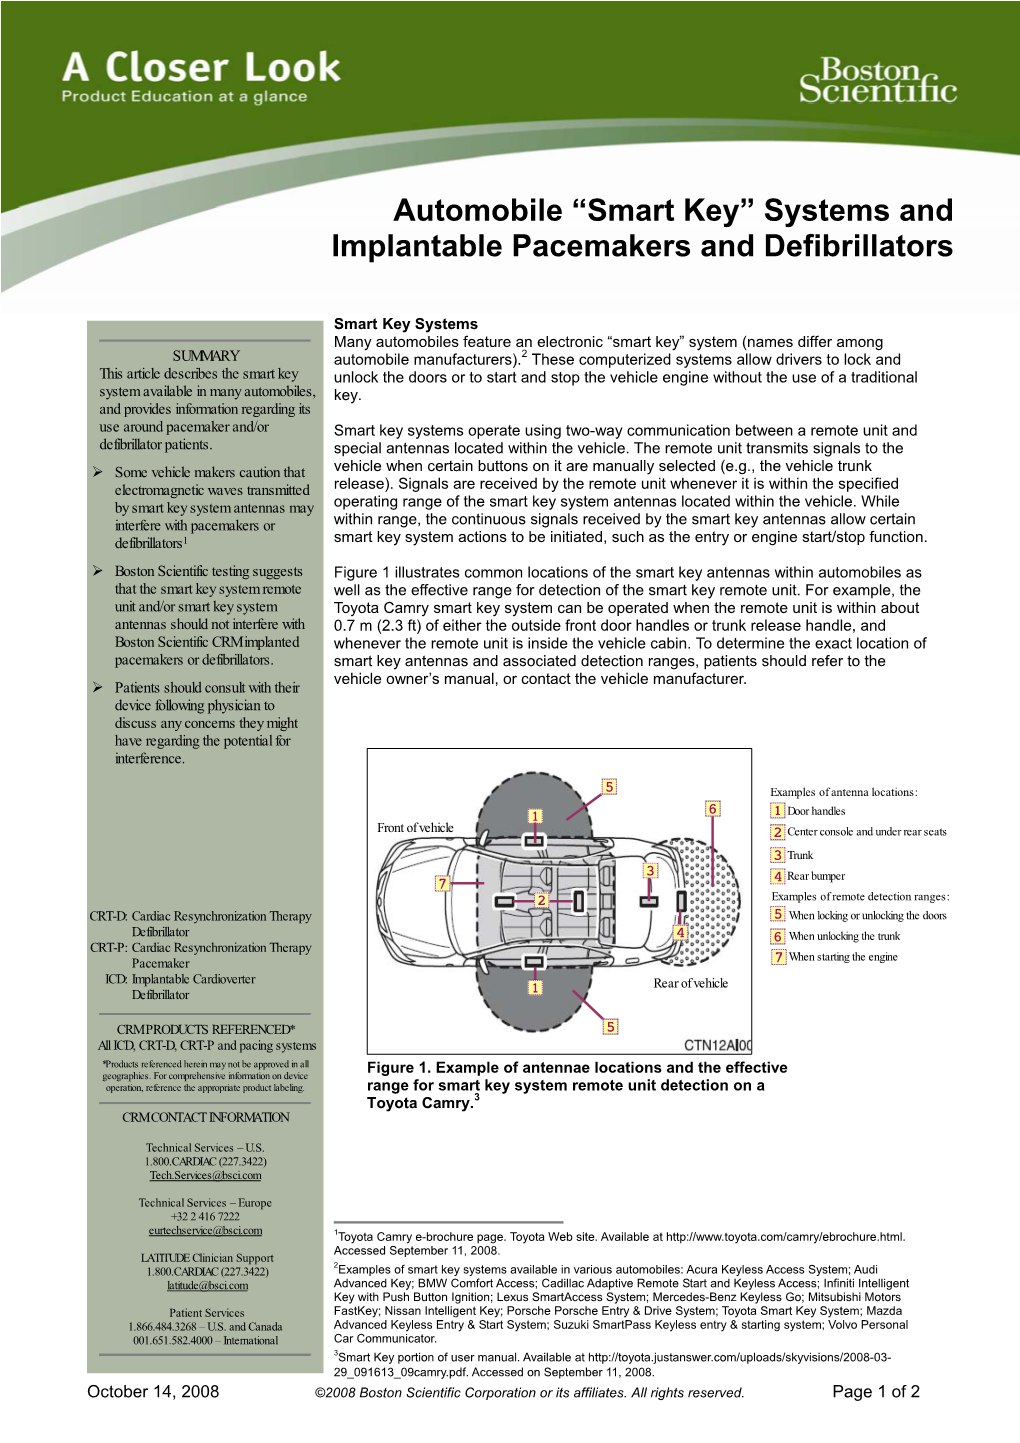 “Smart Key” Systems and Implantable Pacemakers and Defibrillators